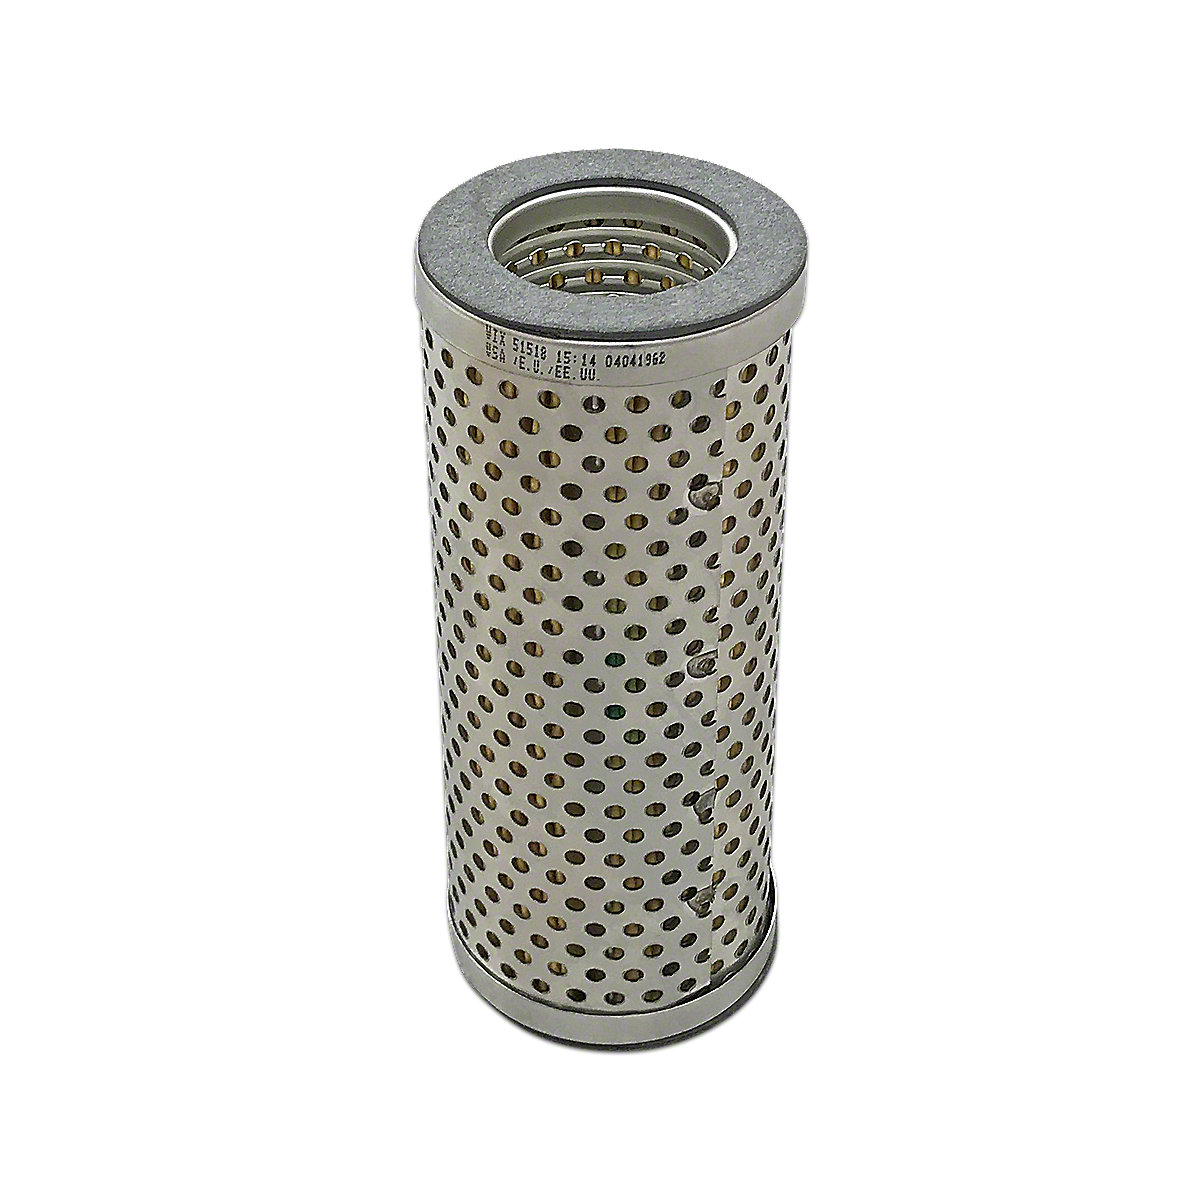 Details about   ABC4535 Hydraulic Filter Fits Case 